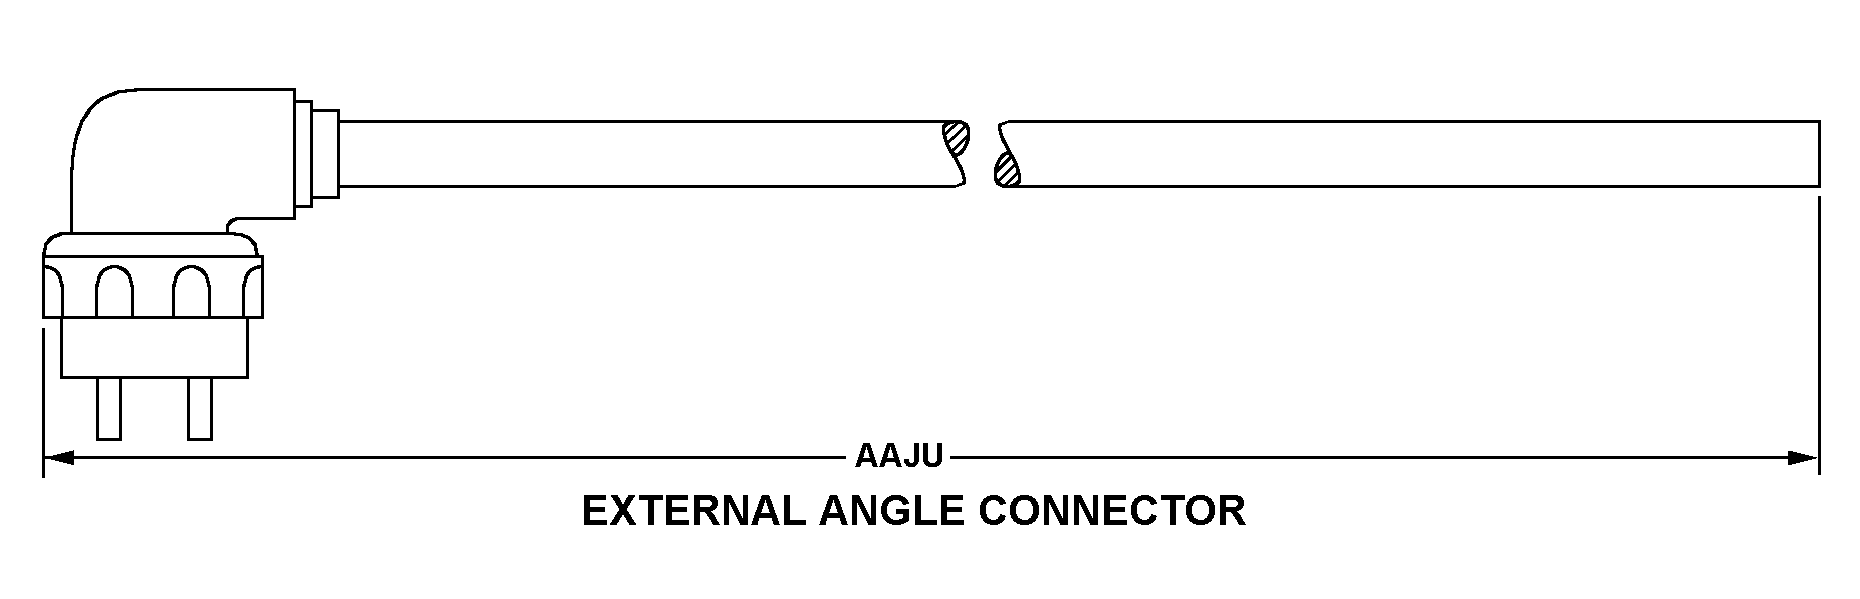 EXTERNAL ANGLE CONNECTOR style nsn 6150-01-575-6913